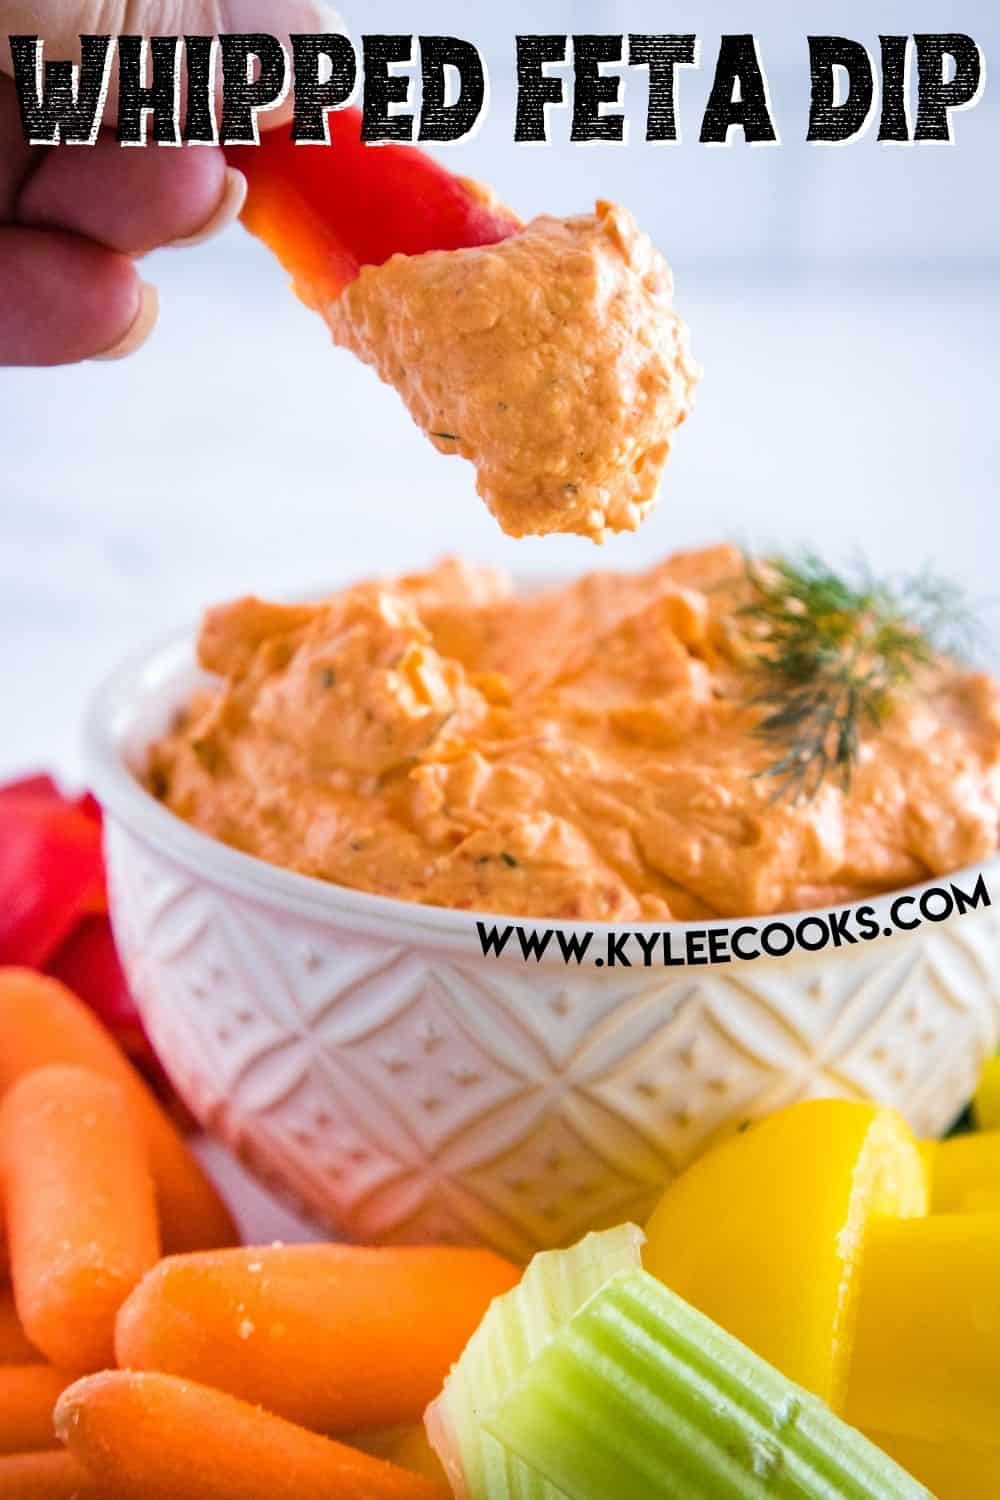 whipped feta dip with recipe title overlaid in text